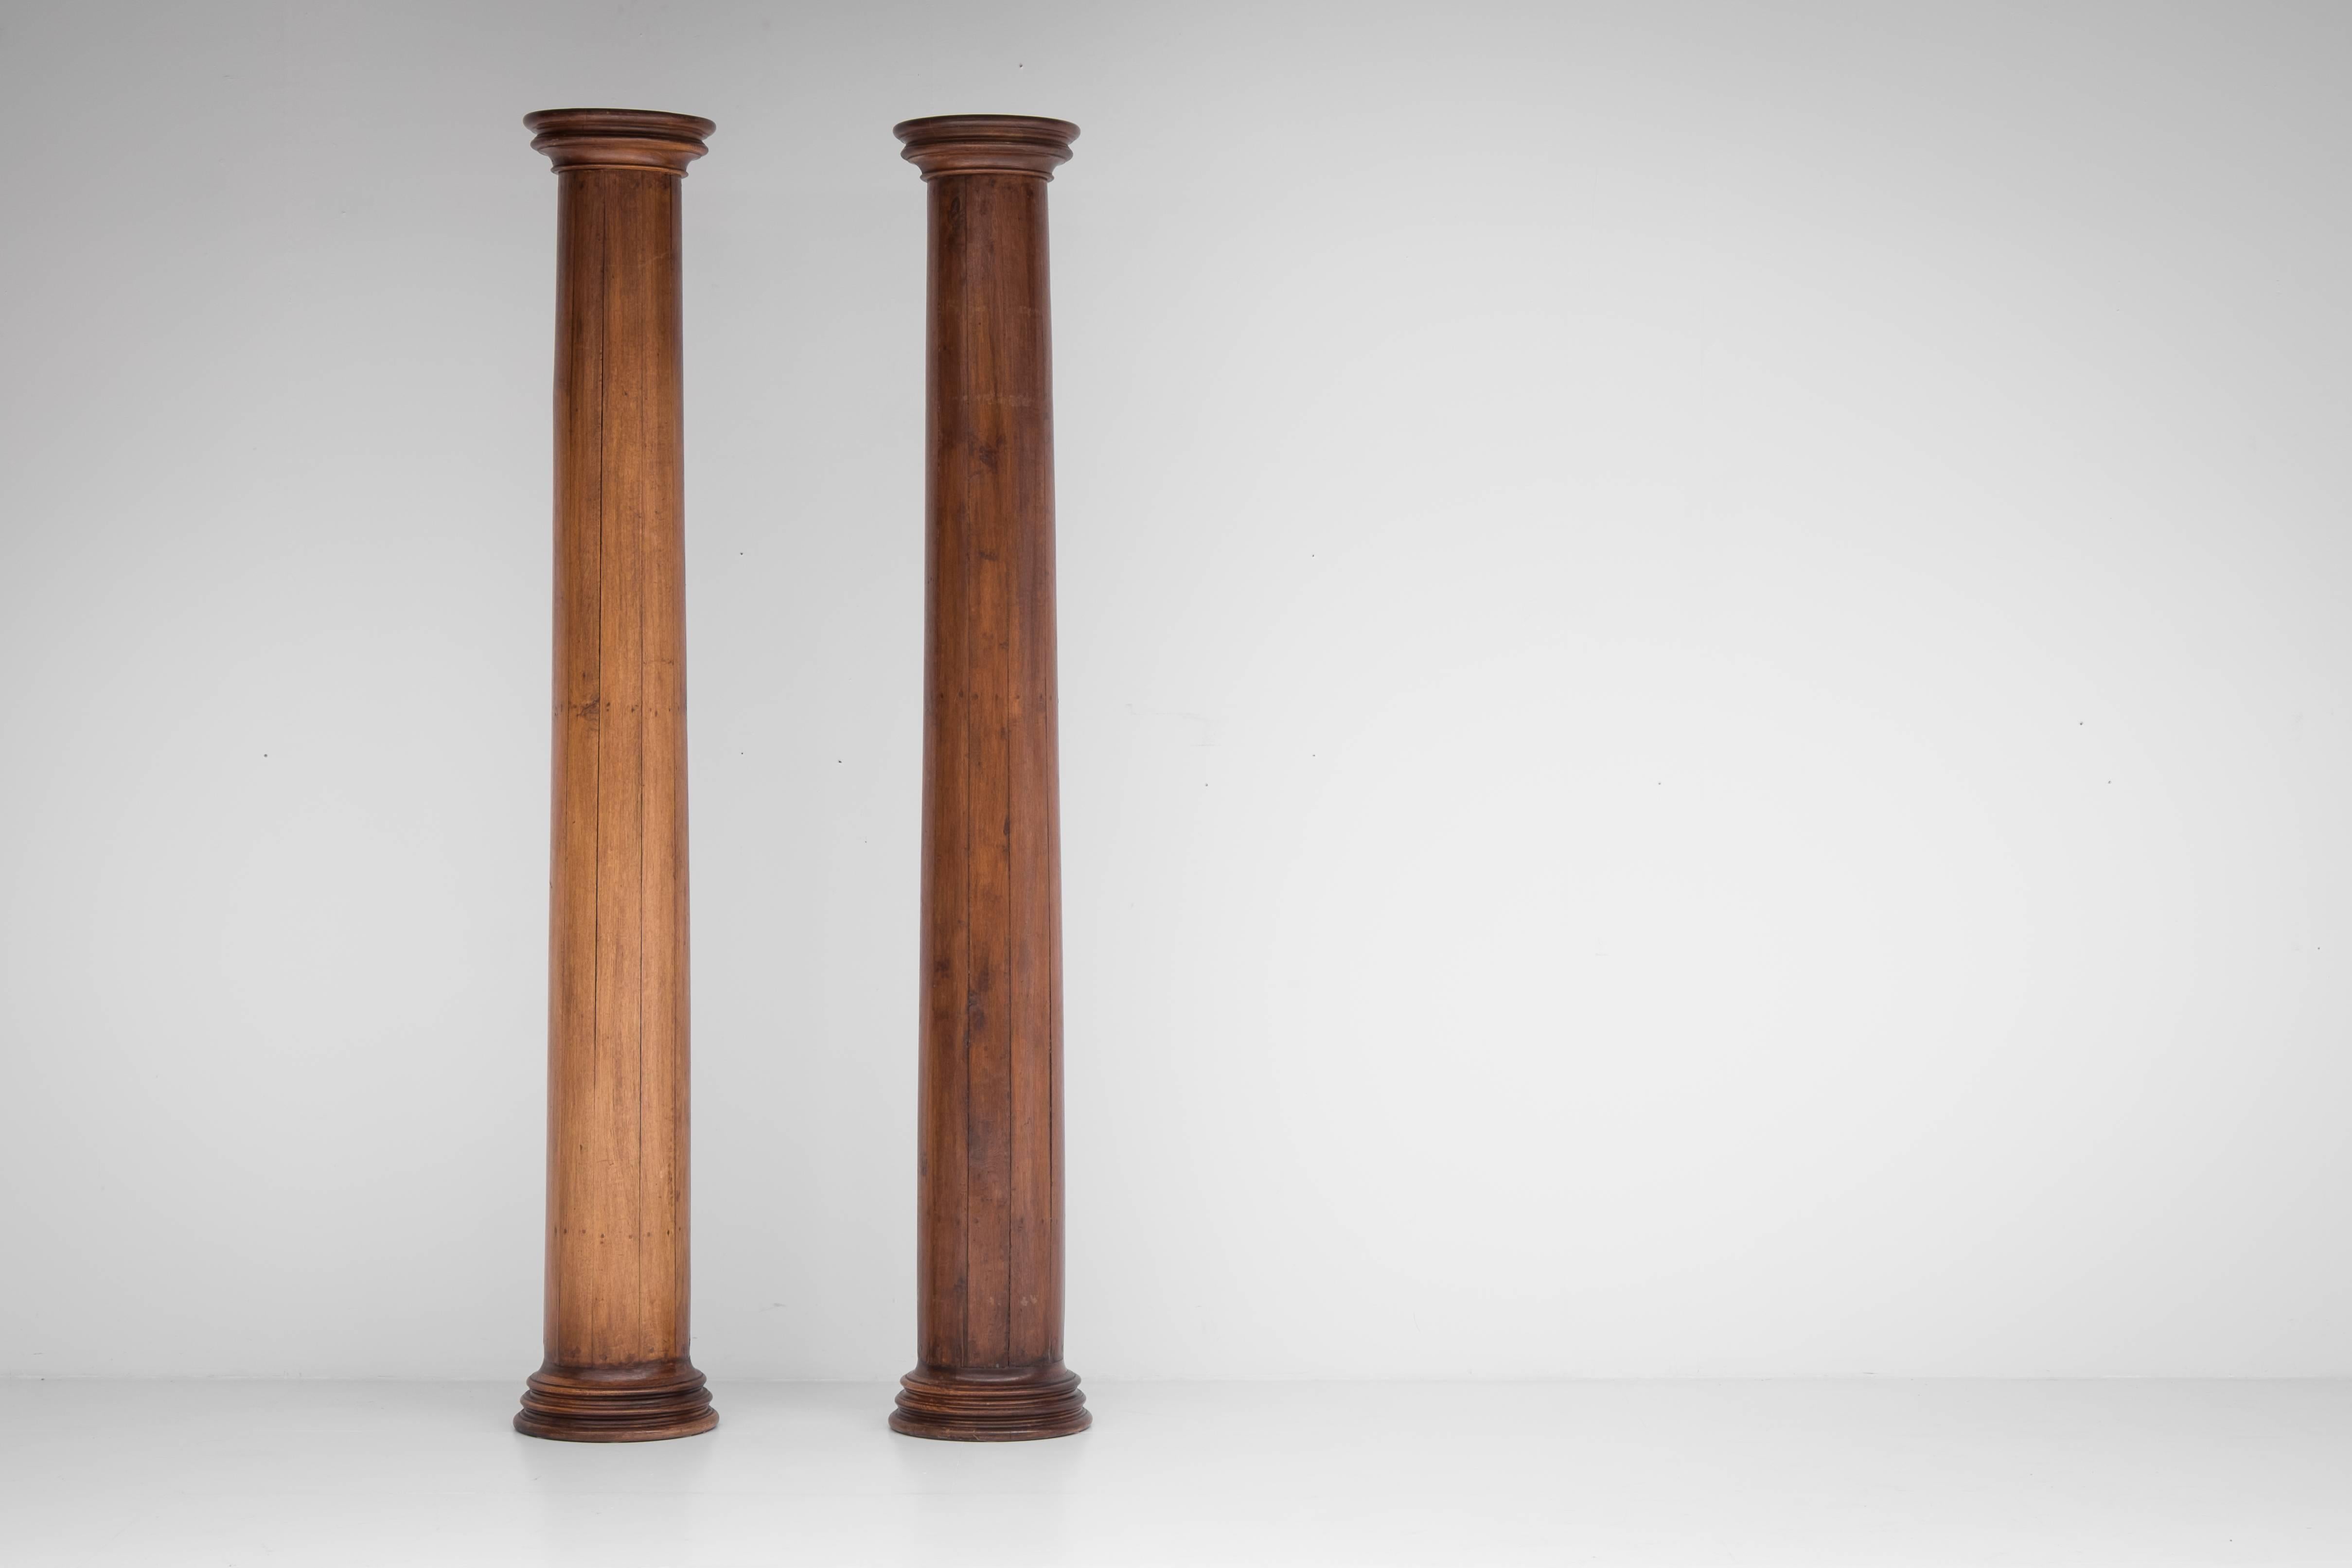 Pair of cylindrical, neoclassical, wooden columns in oak on a molded, circular base.

Italian, first period of the 20th century.